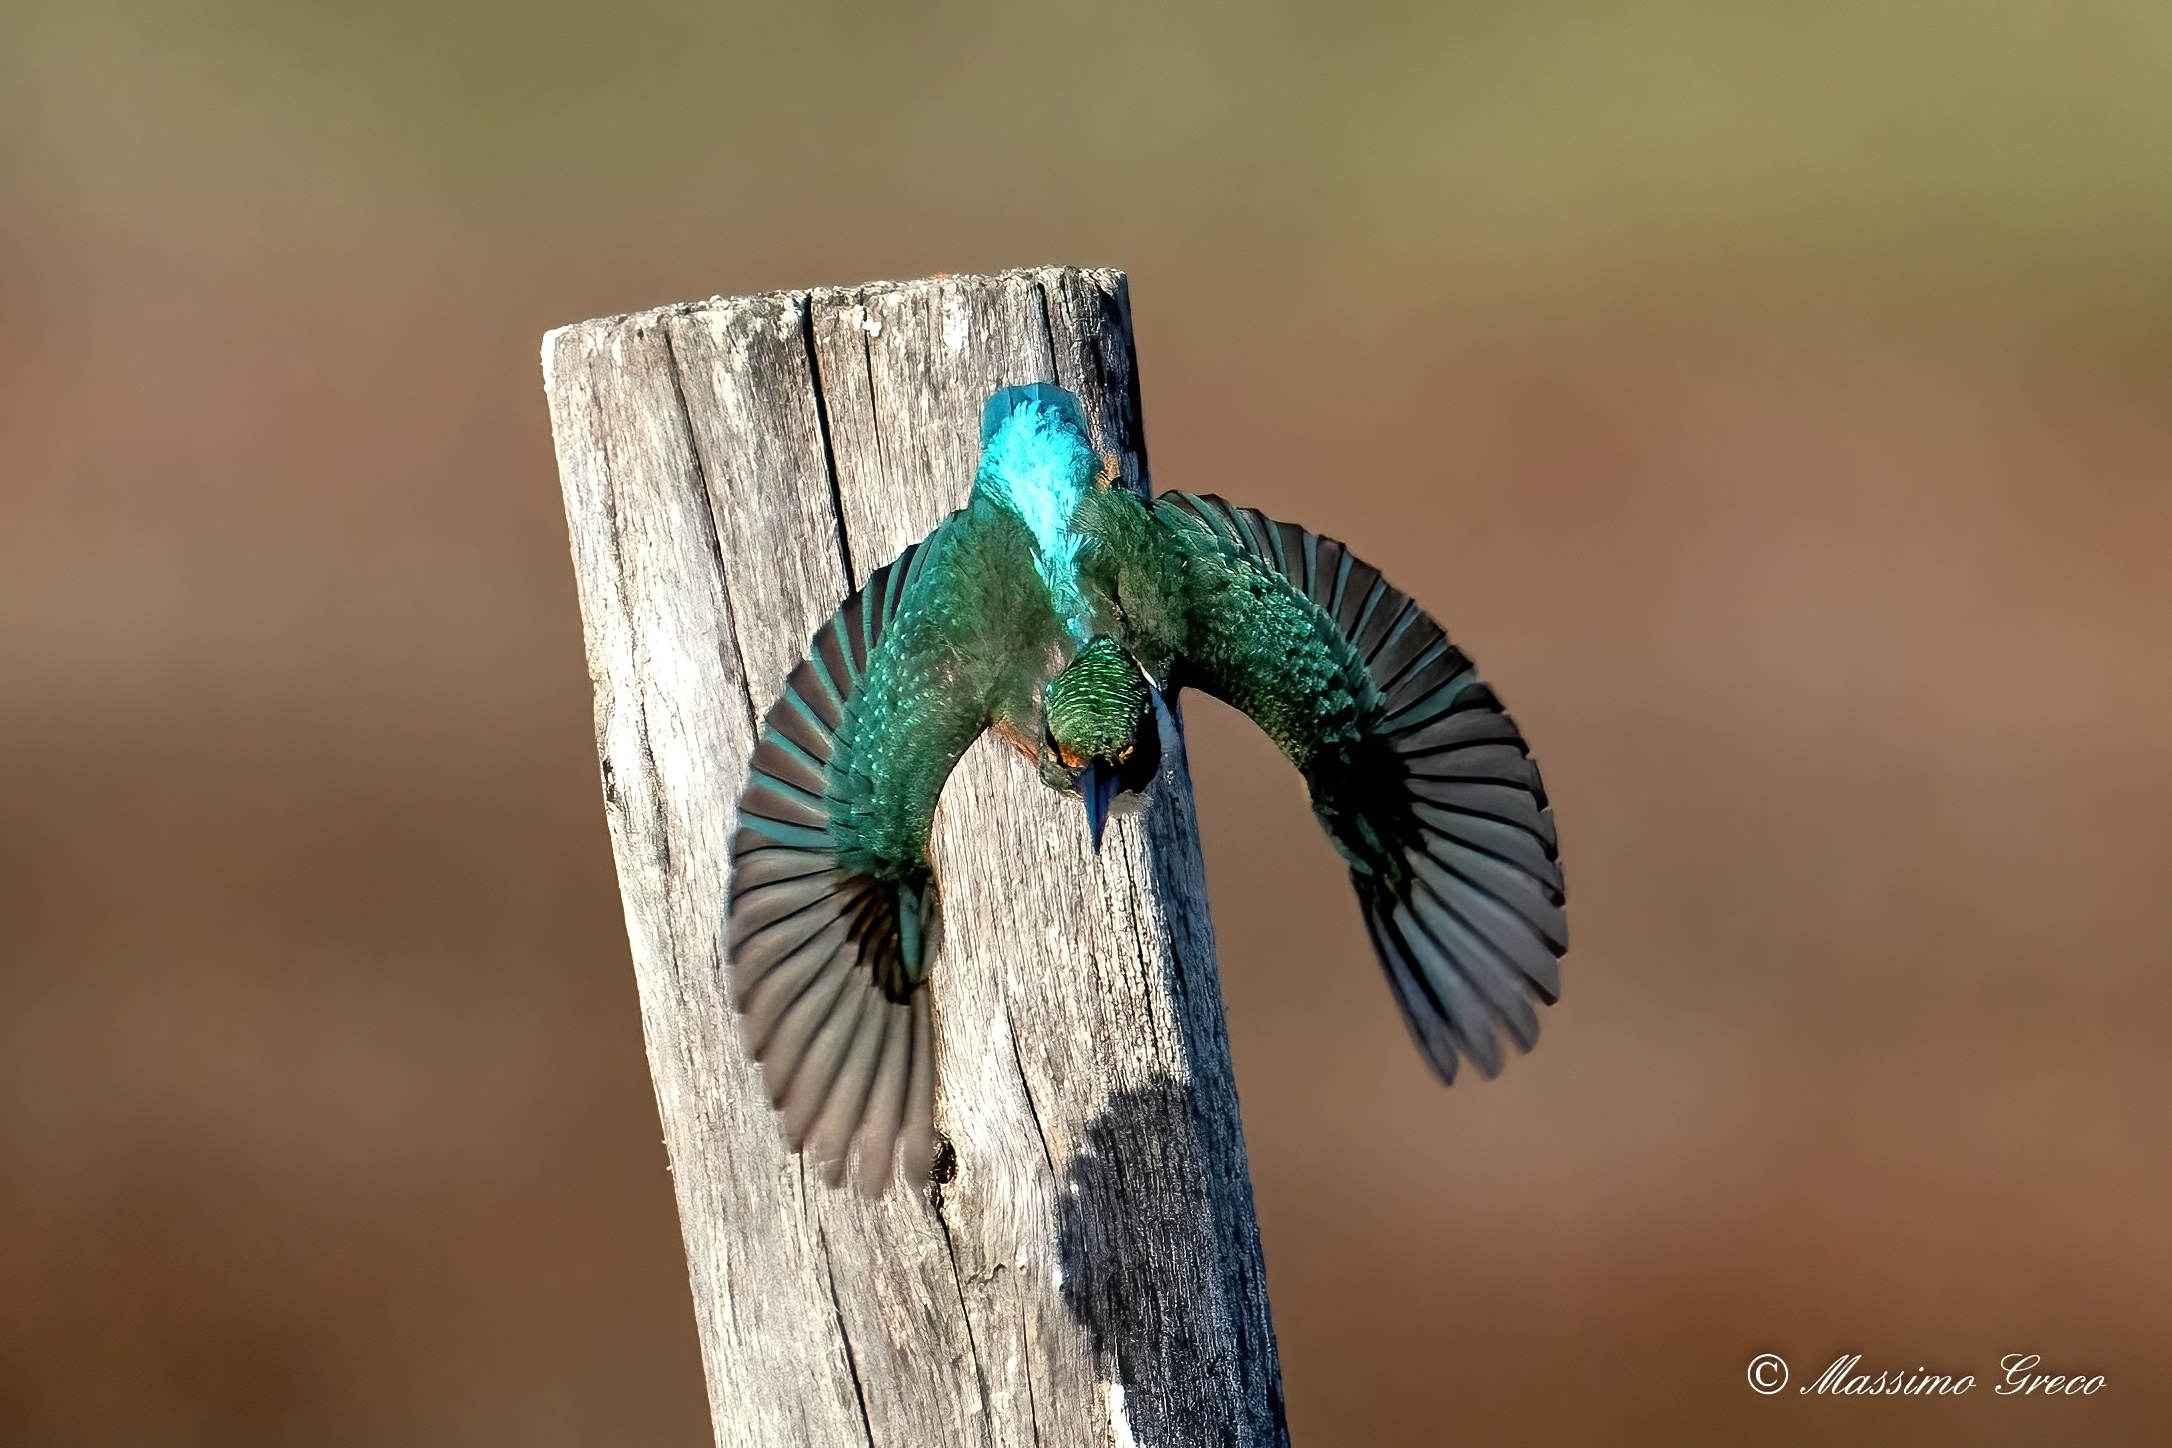 Diving kingfisher...